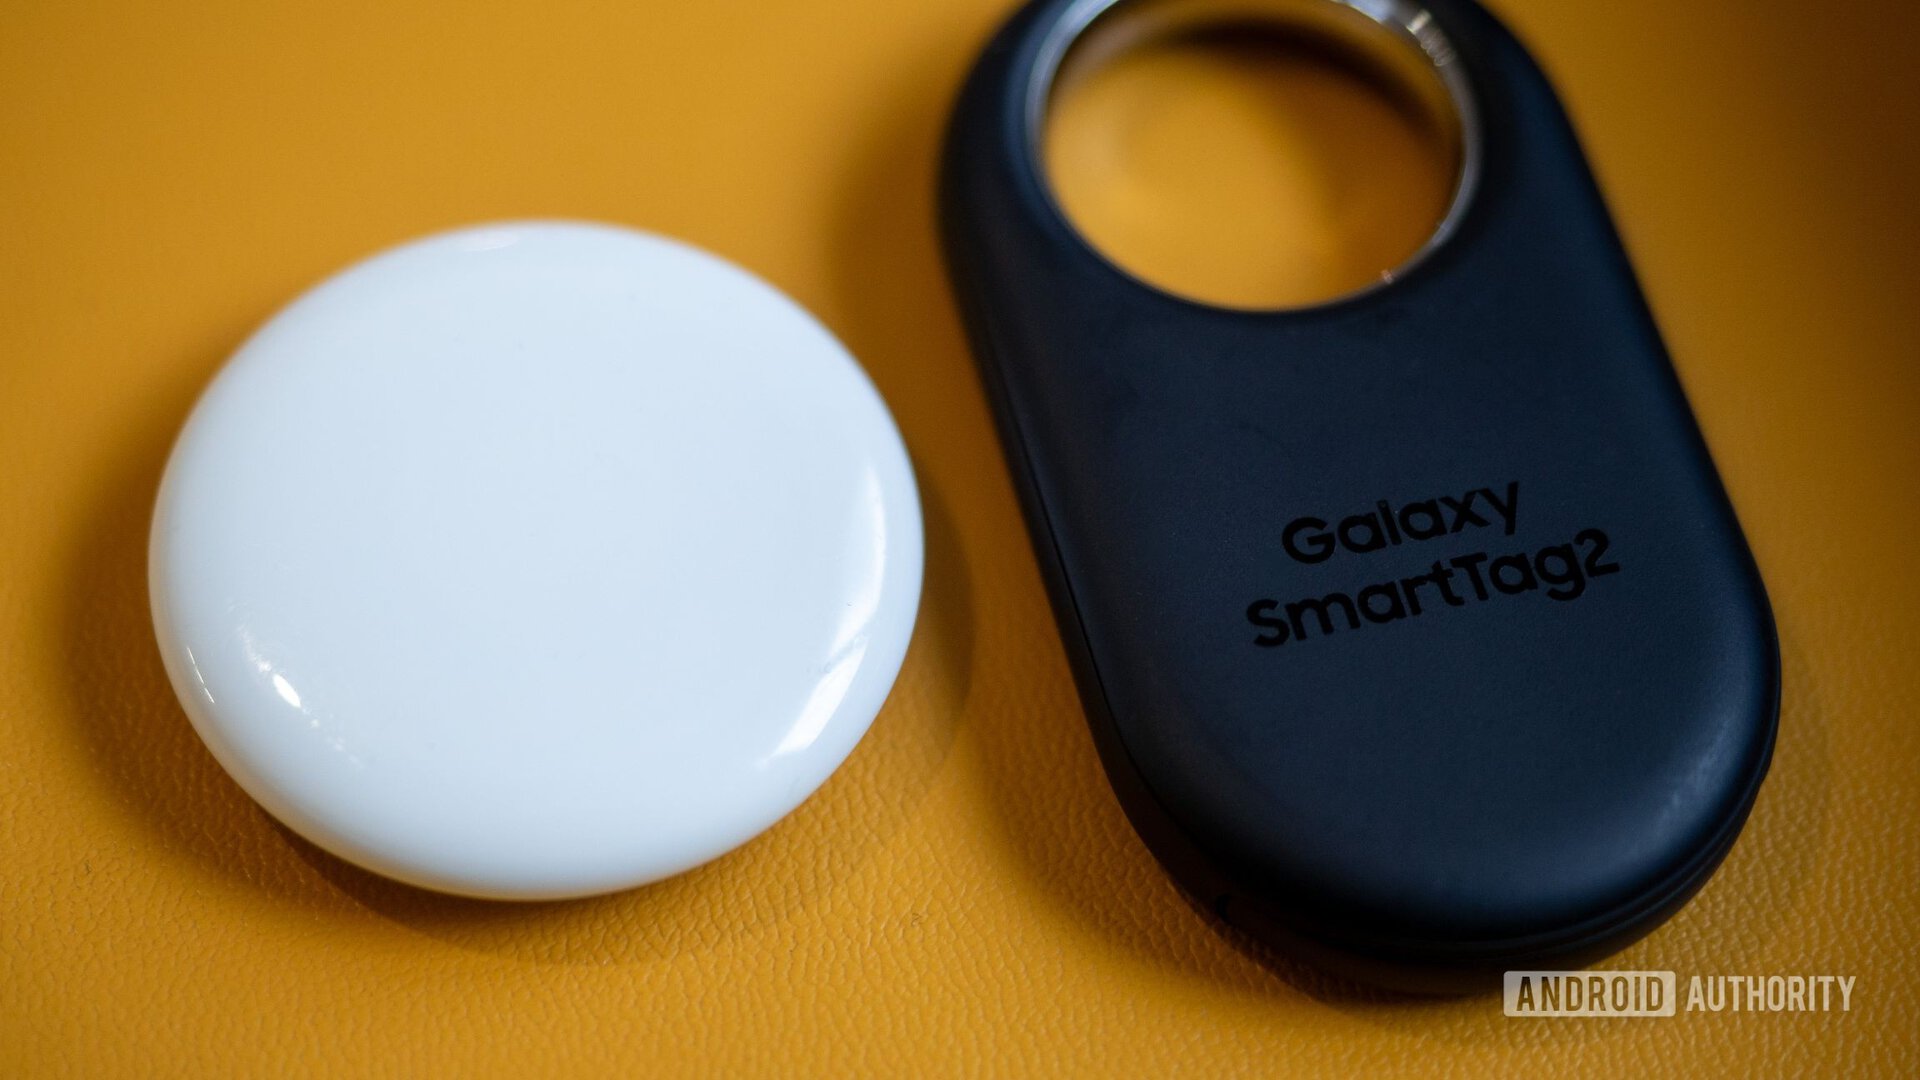 Samsung Galaxy SmartTag2 review: As good as the AirTag, if not better